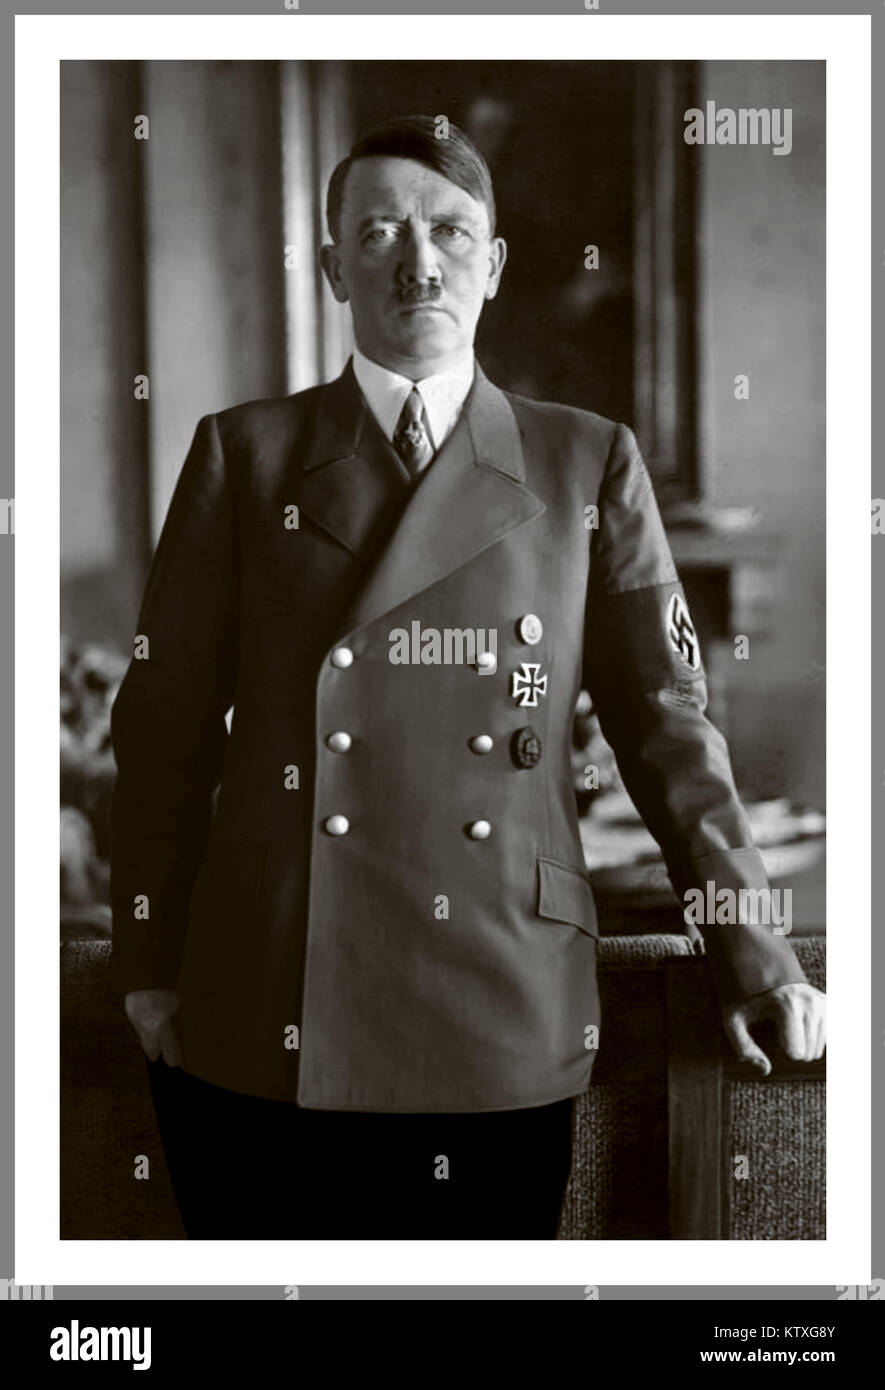 PORTRAIT ADOLF HITLER in official uniform with swastika armband  portrait of Fuhrer Adolf Hitler by Heinrich Hoffman (personal photographer) in the Berlin Reichstag Germany 1930s Stock Photo